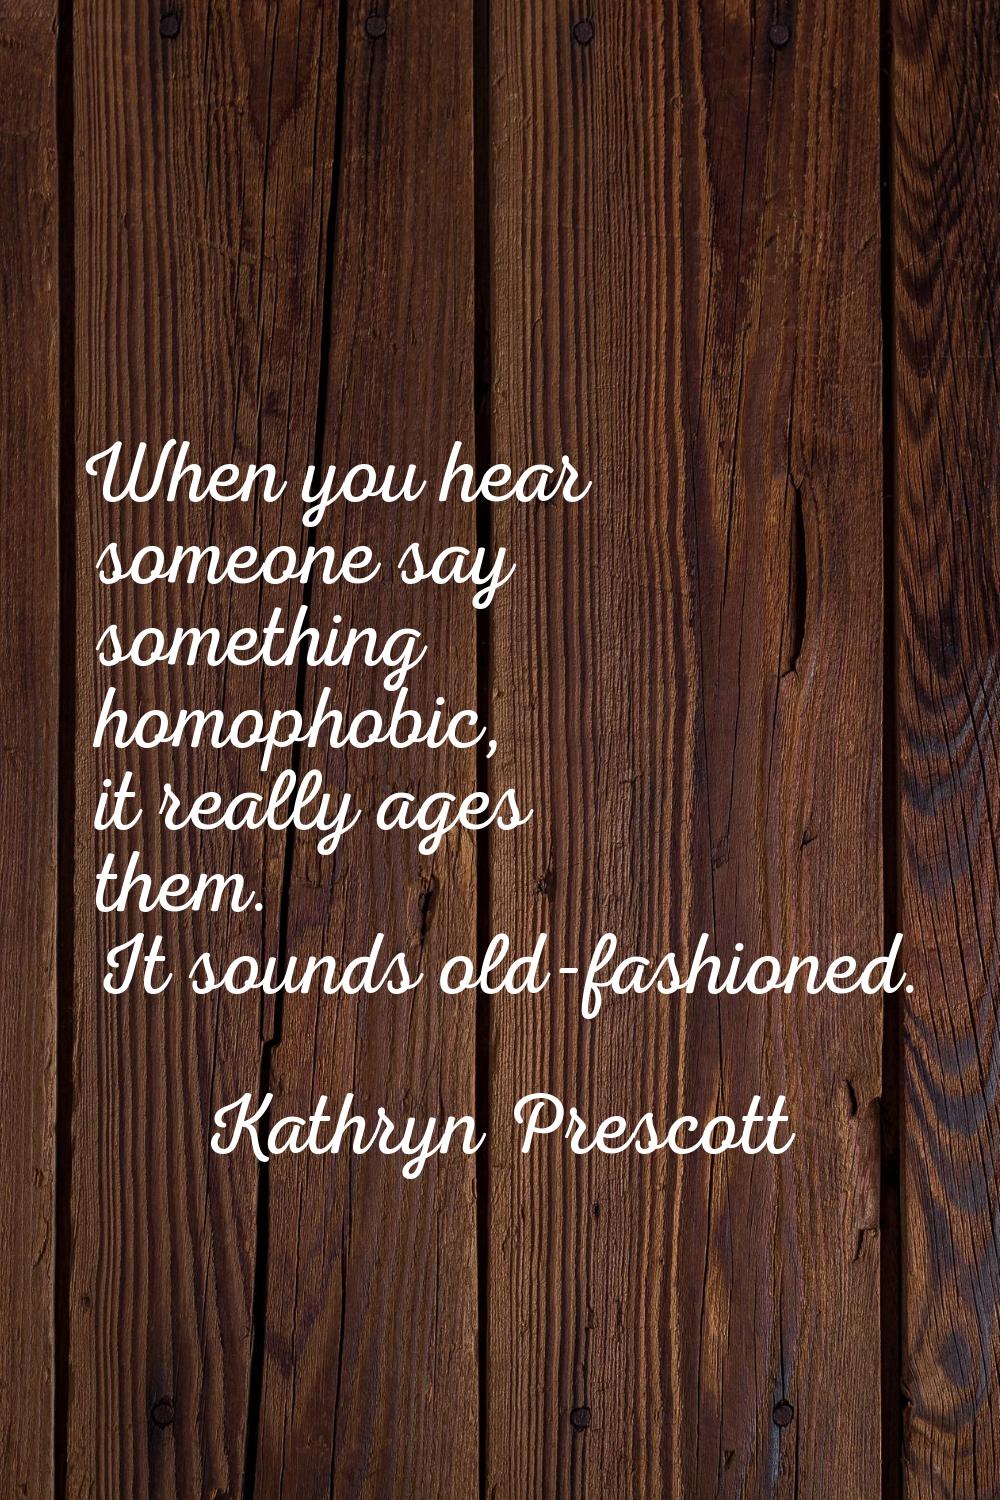 When you hear someone say something homophobic, it really ages them. It sounds old-fashioned.